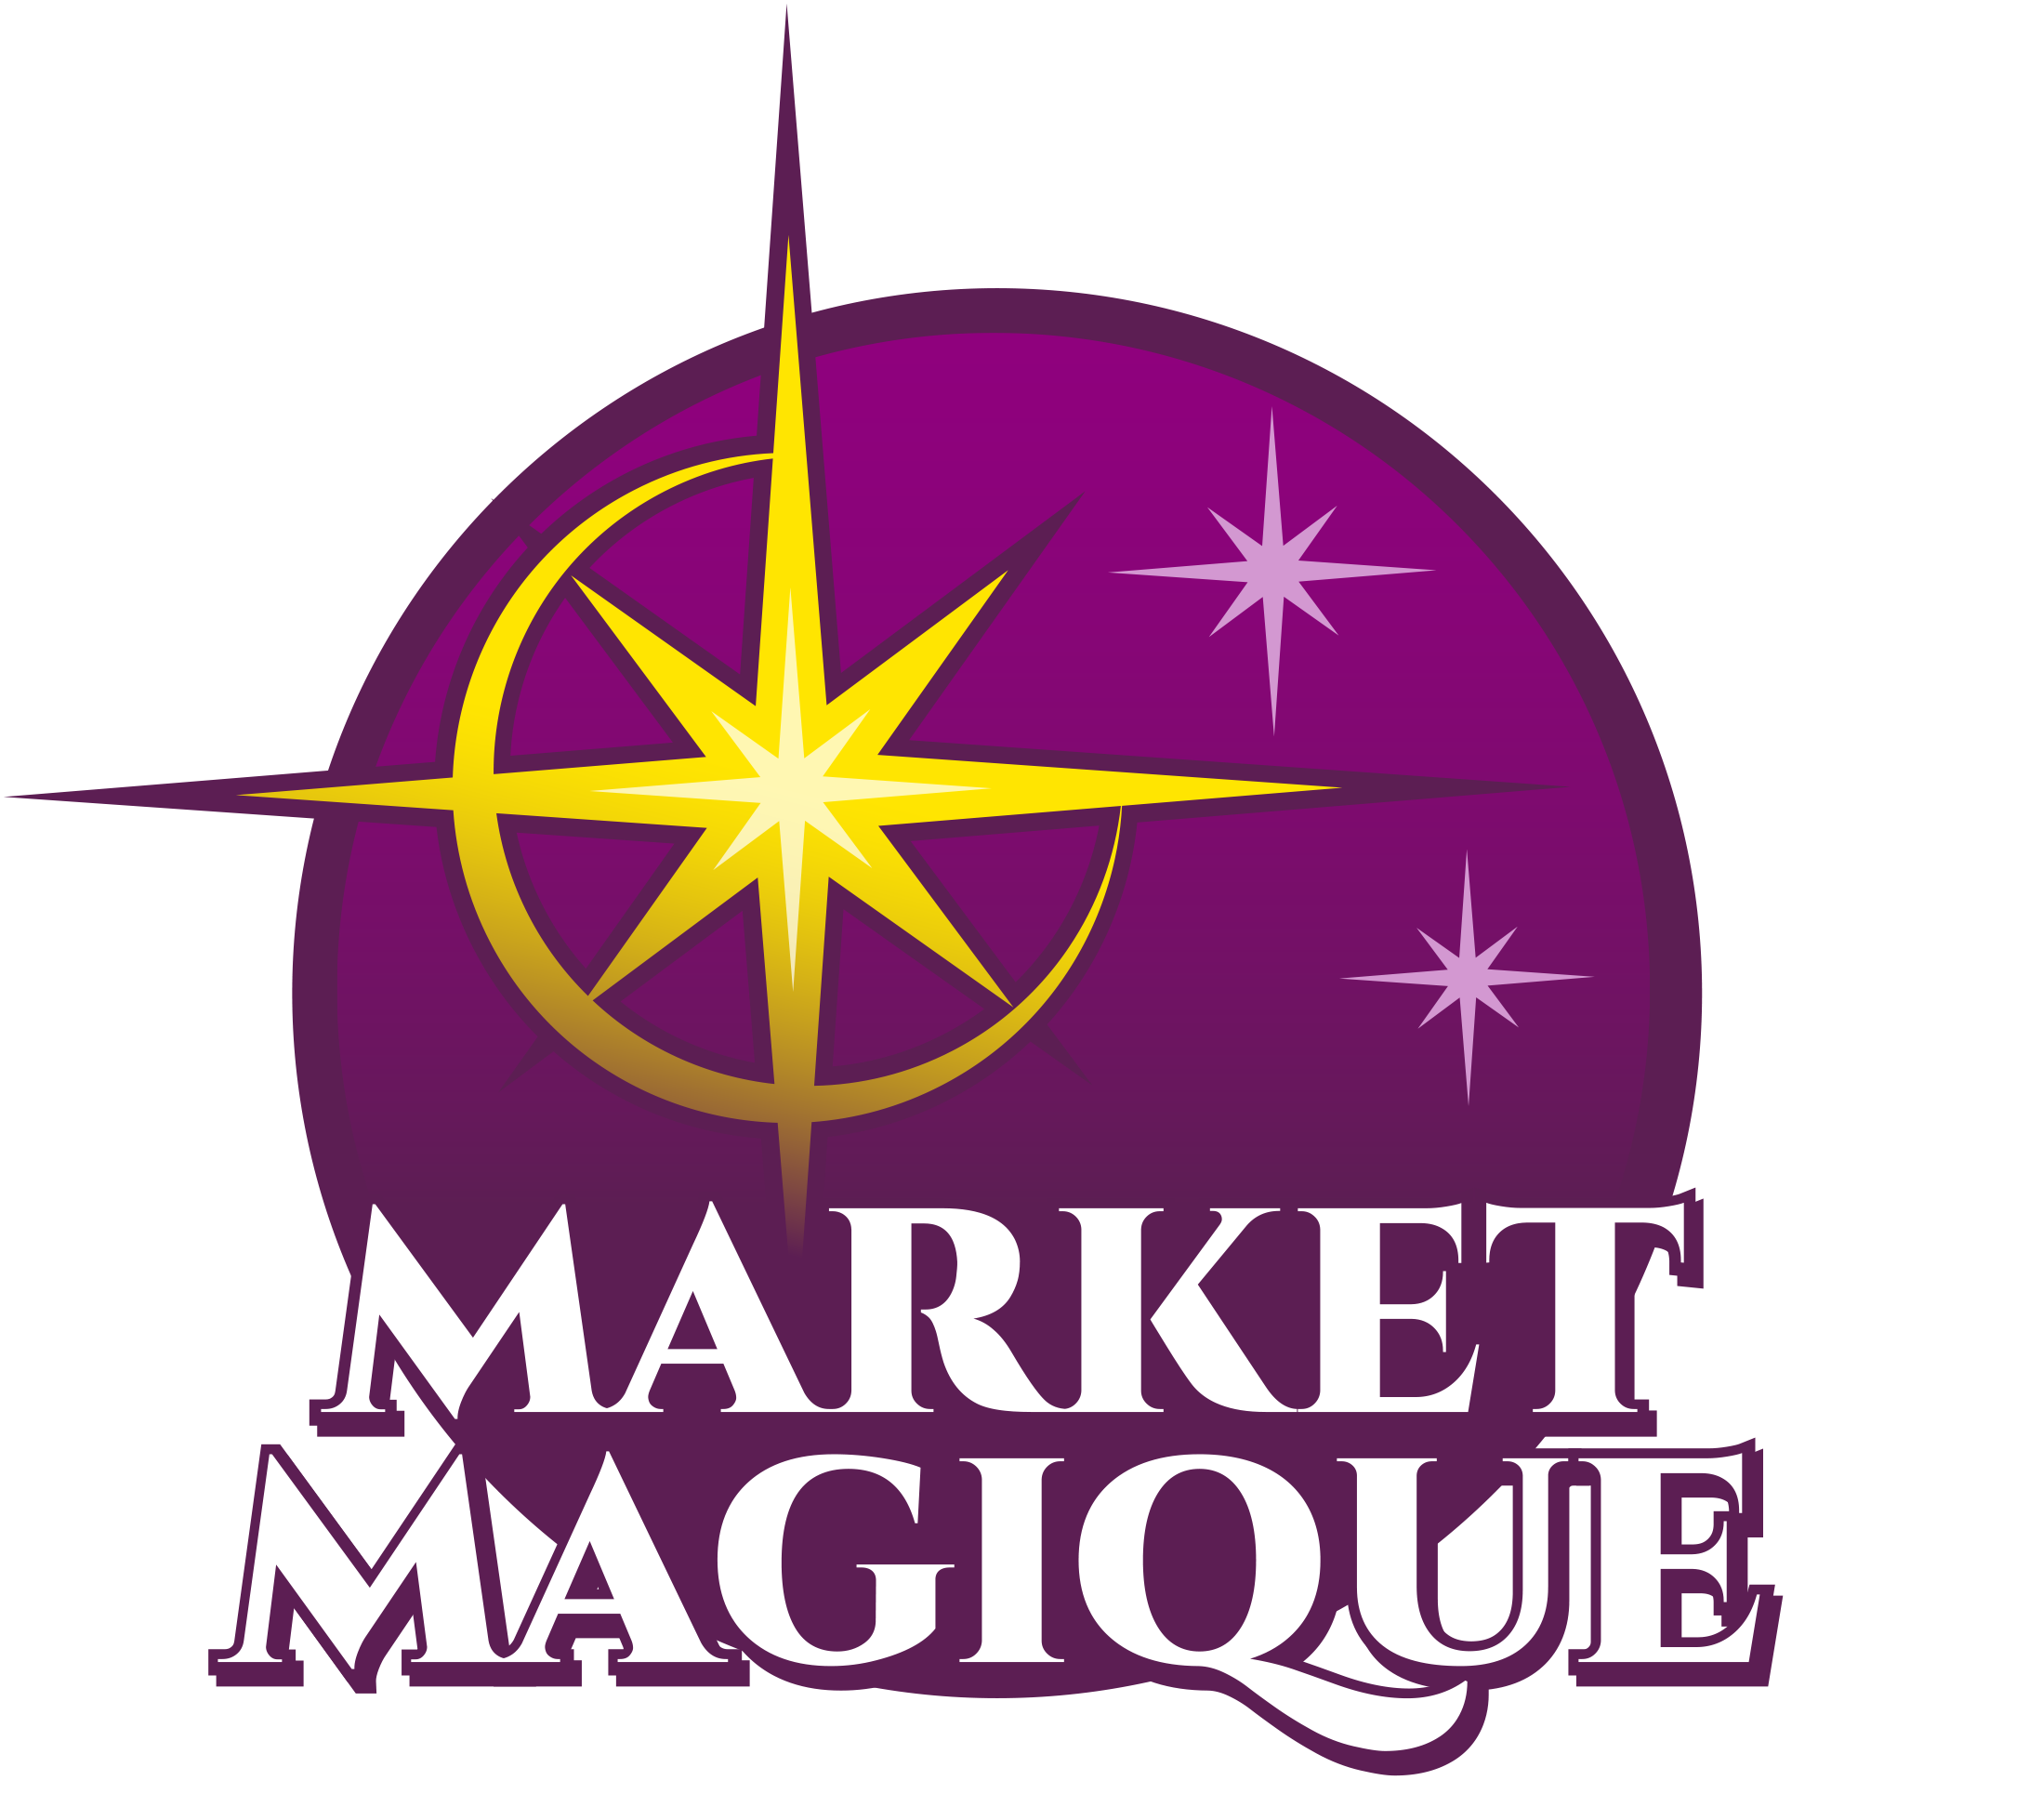 The Market Magique logo consists of a purple circle with a large yellow star shifted to the left of the circle. The words Market Magique appear in bold at the bottom of the circle.